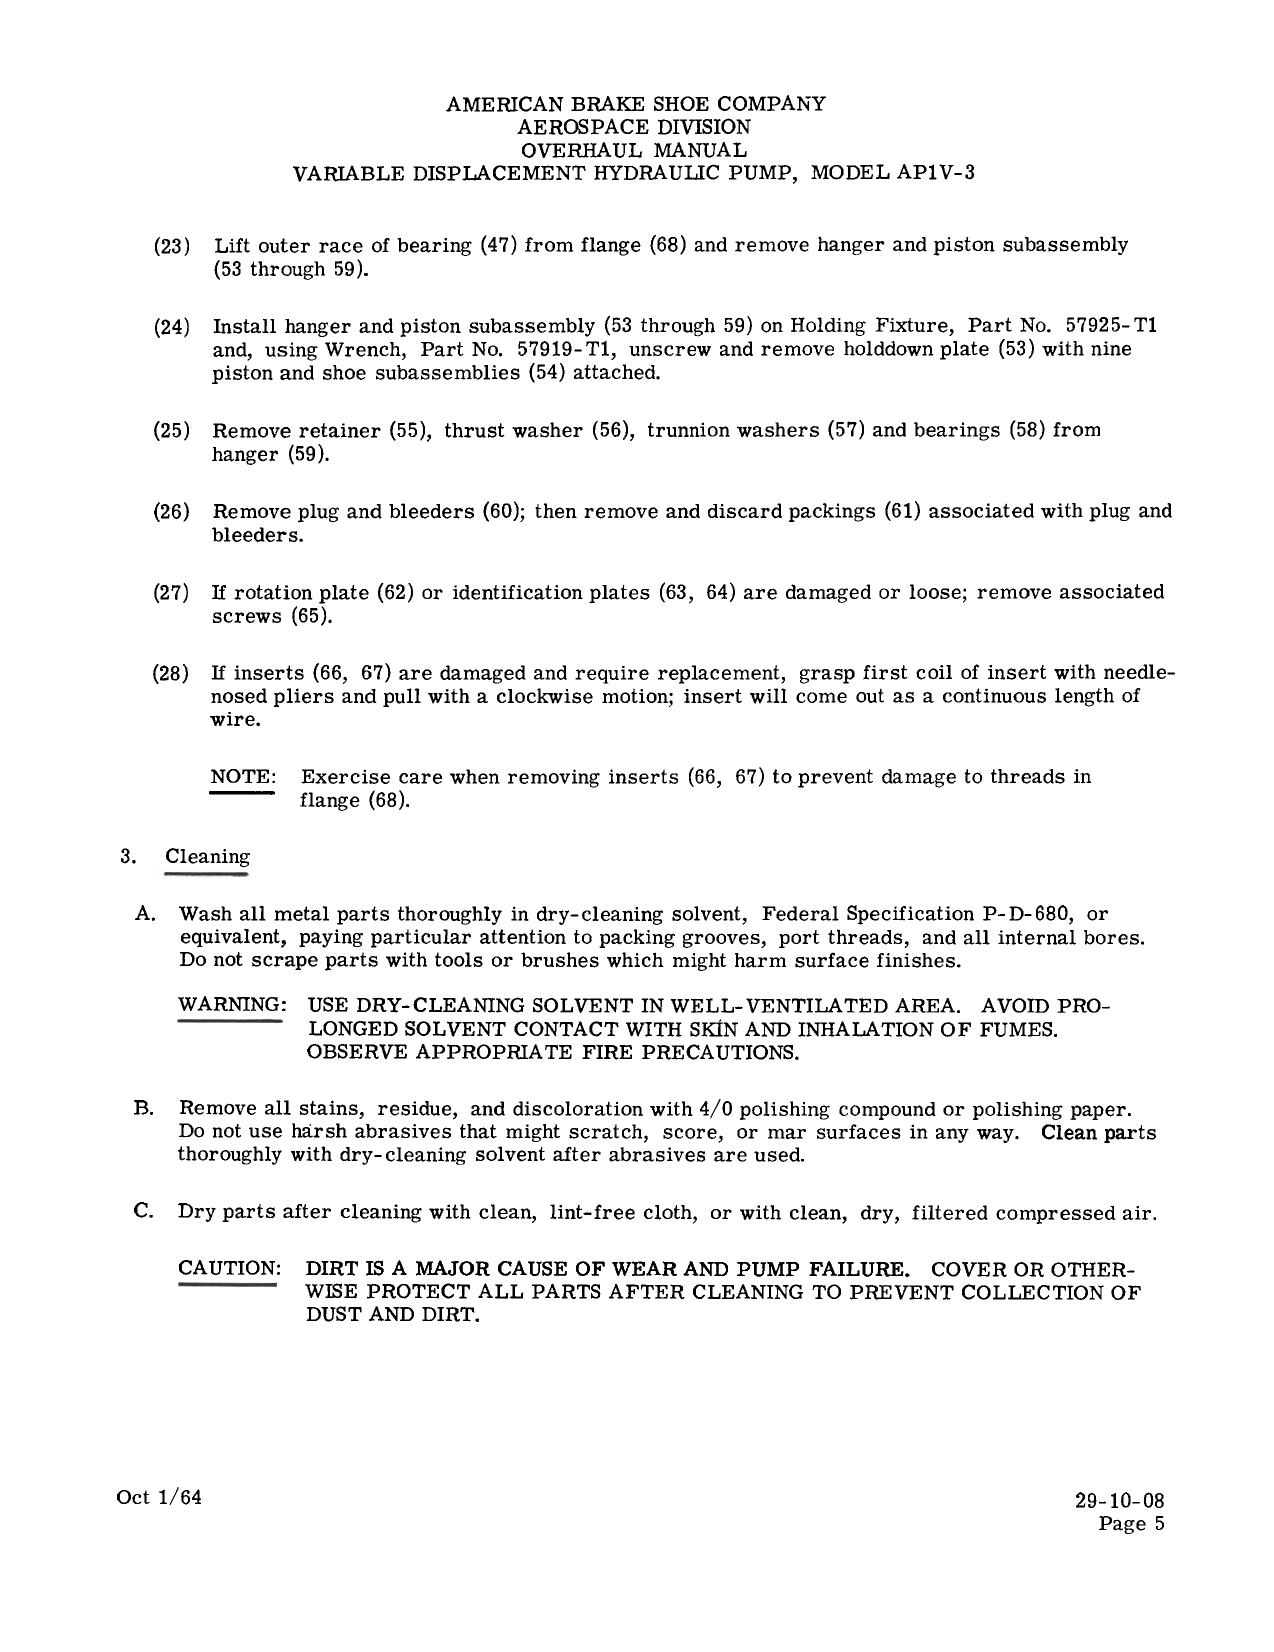 Sample page 7 from AirCorps Library document: Overhaul Manual for Variable Displacement Hydraulic Pump - Model AP1V-3 - Part 57083 